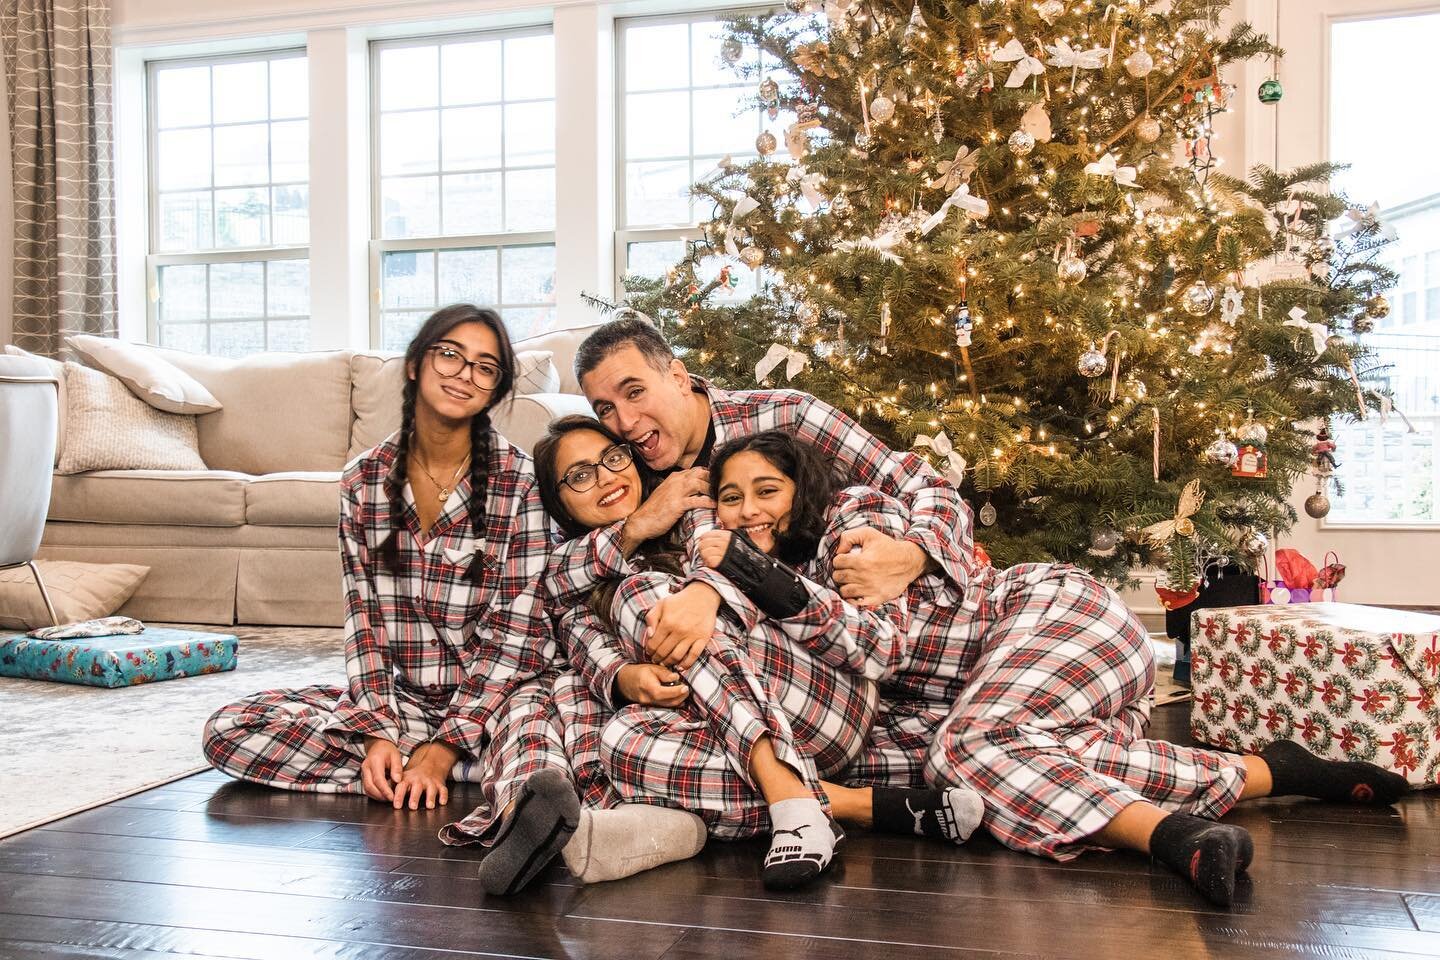 Wishing you all a very Merry Christmas. May the blessings of peace, good will, and happiness be with you at Christmas and always 🙏🏼❤️

And moms... at every age it&rsquo;s hard to get them to smile! 😅

#christmasmagic
#familyaboveall
#gratefulthank